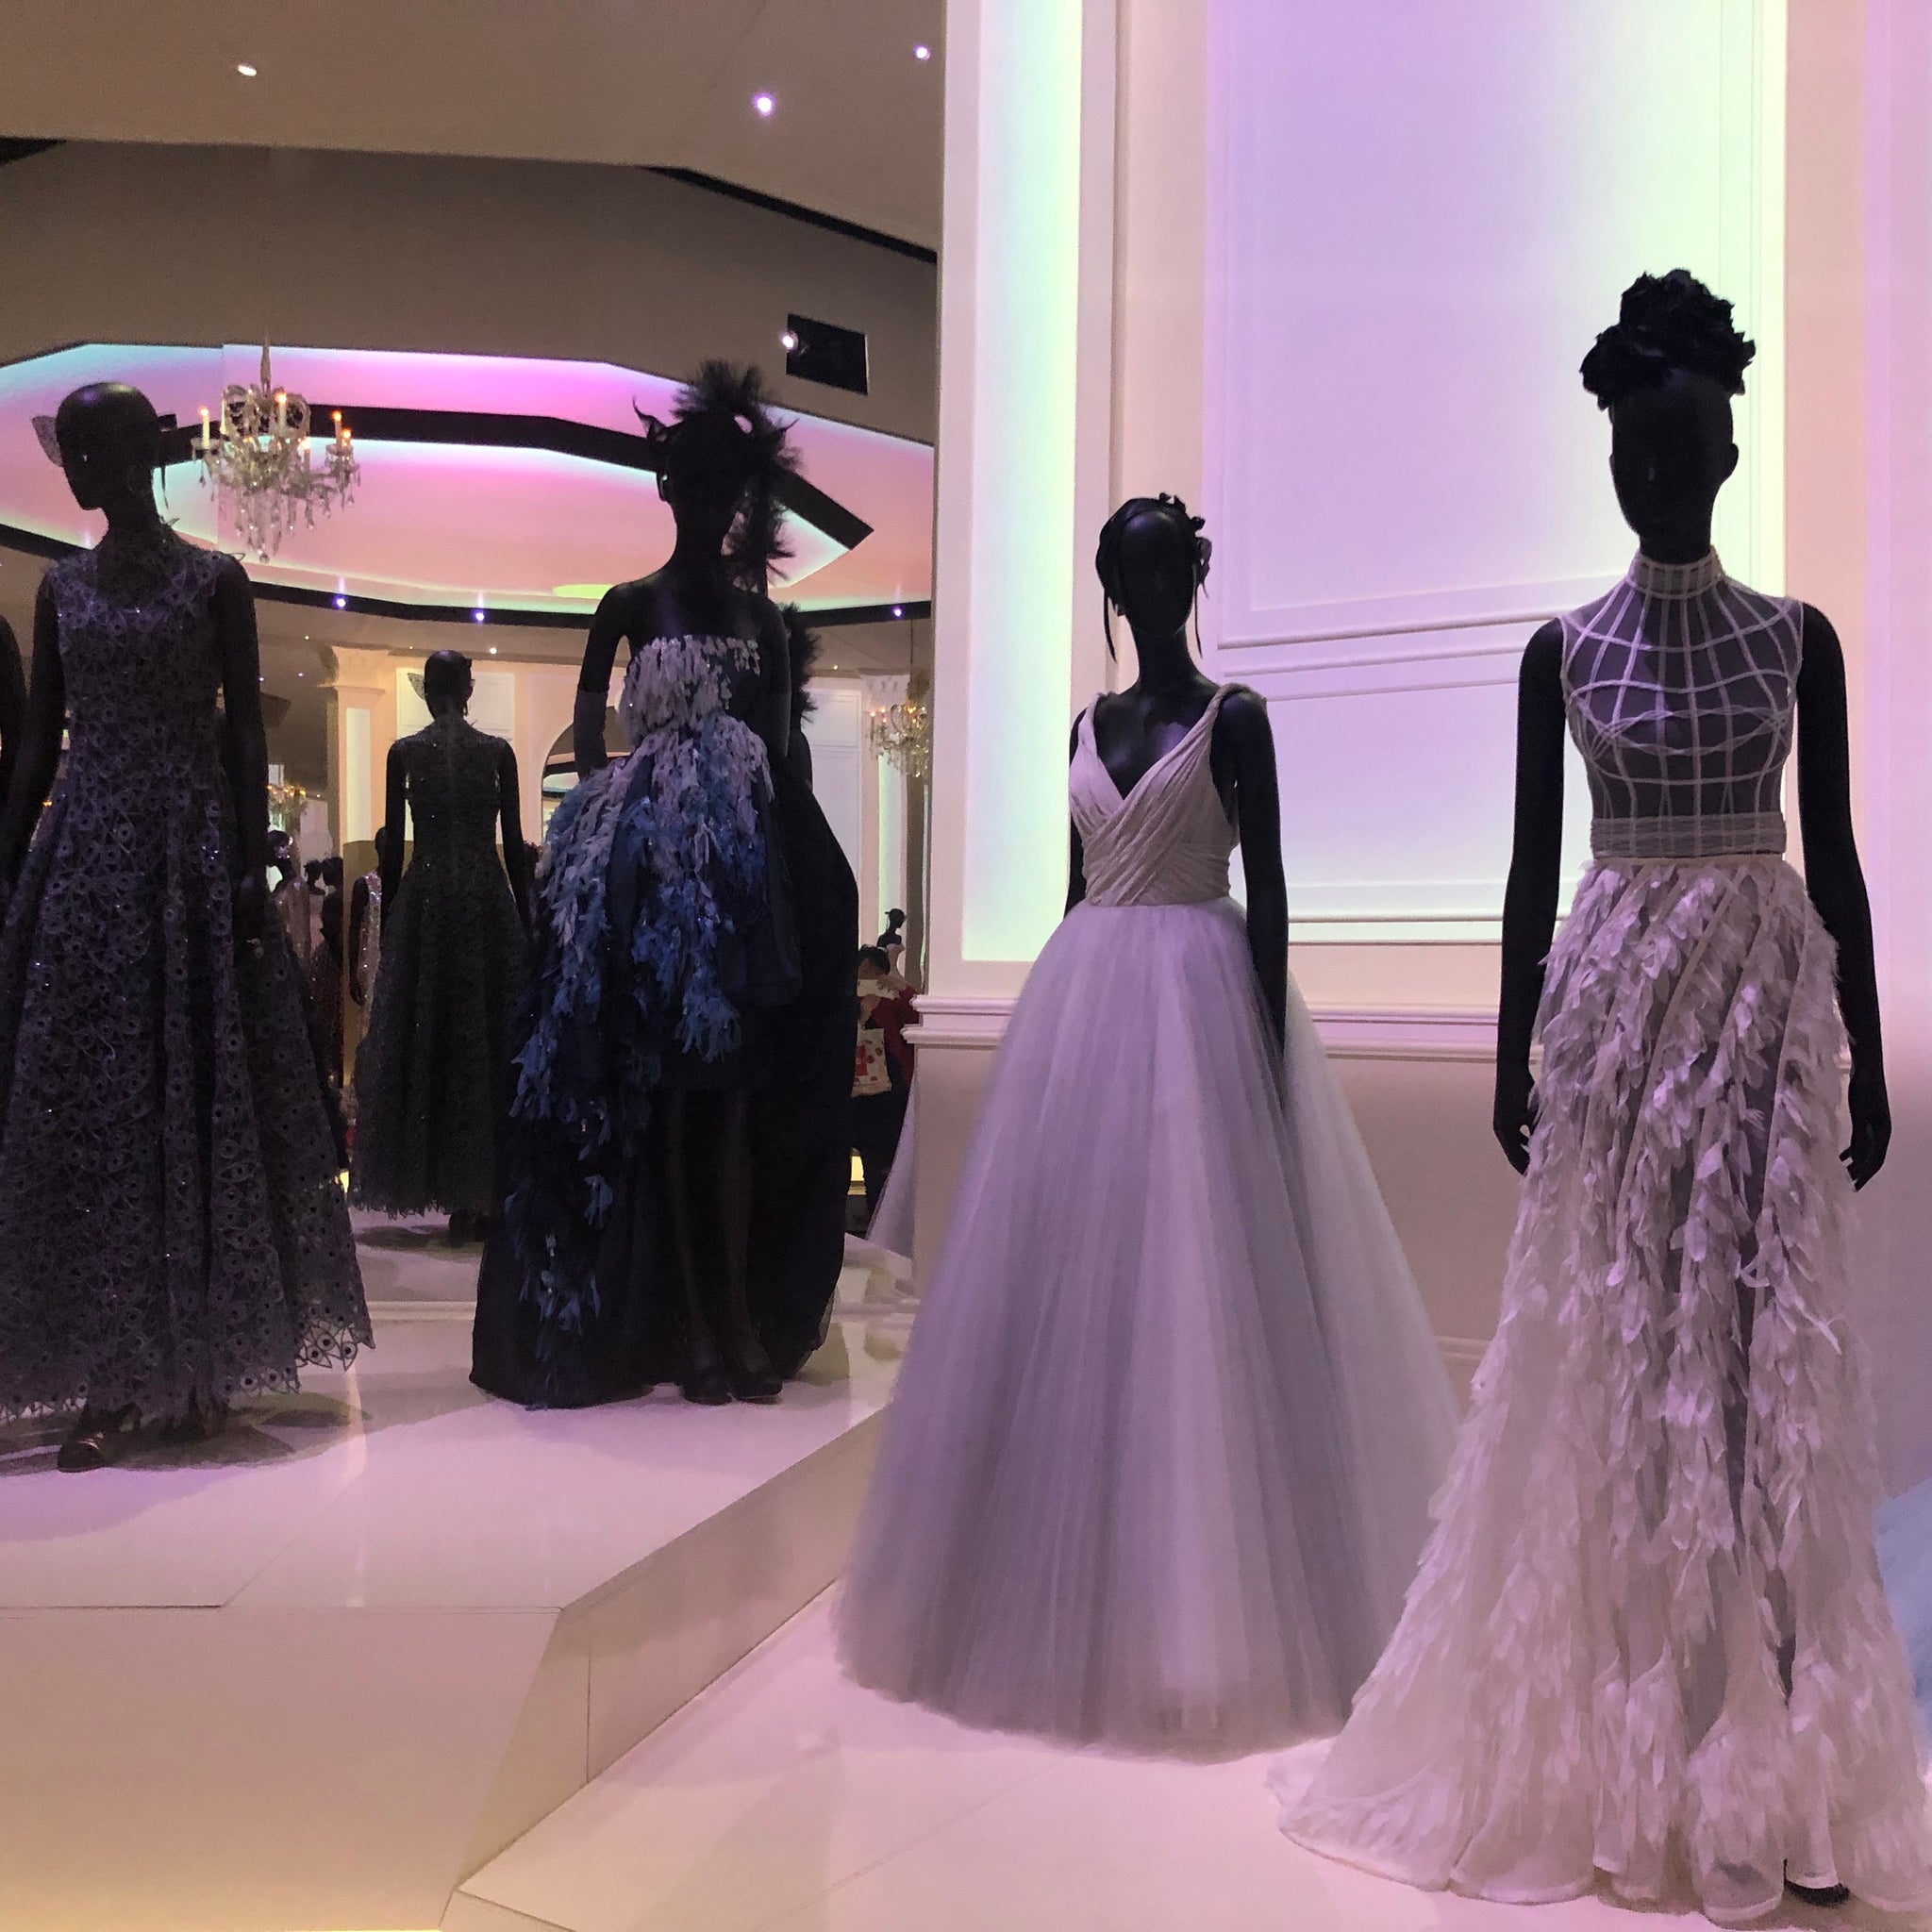 dior v&a opening times